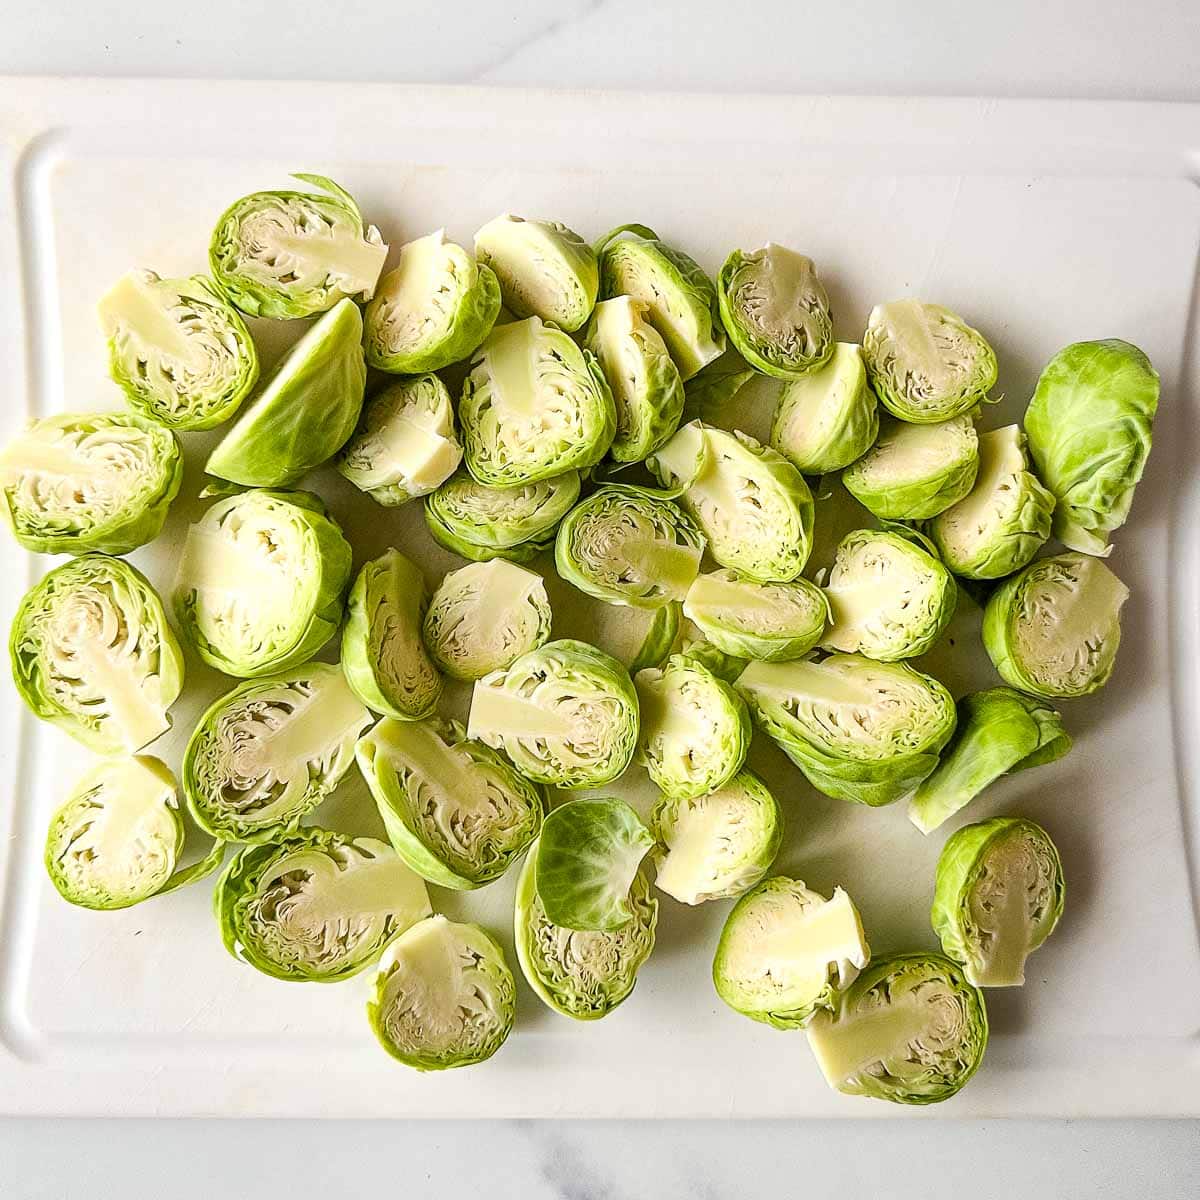 Brussels sprouts on a white cutting board.